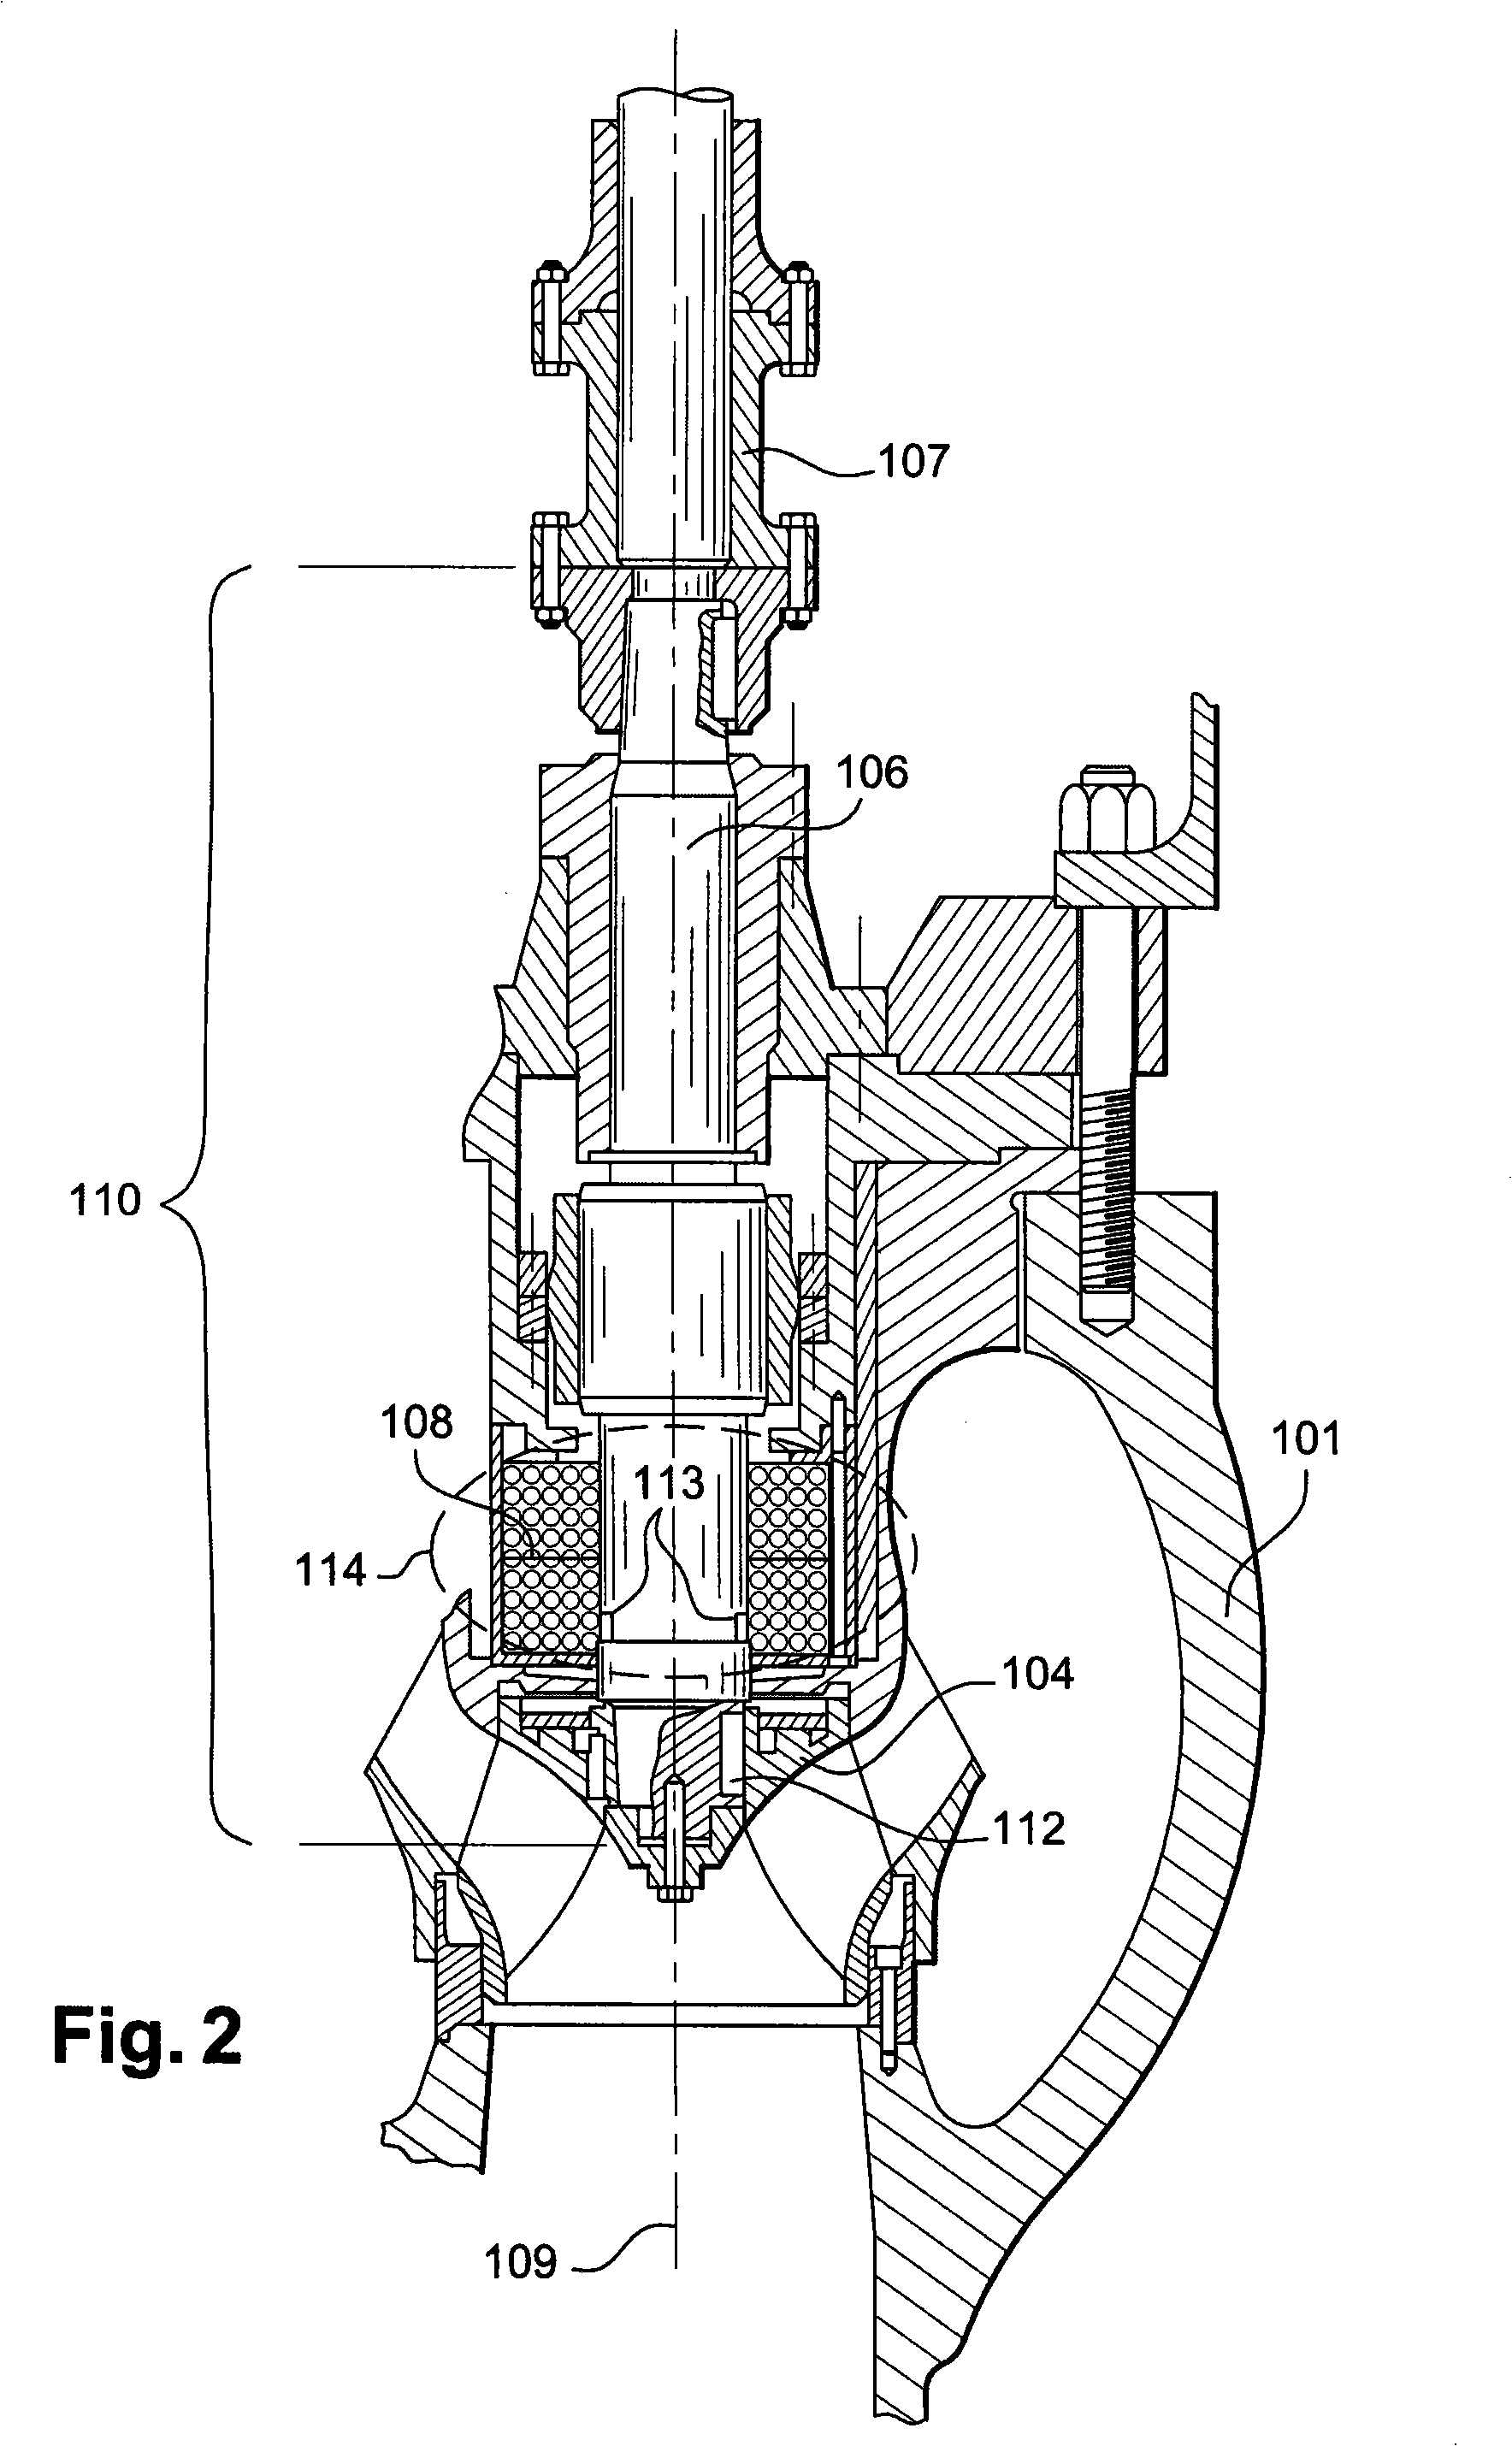 Method for inspecting the state of a rotating machine drive shaft